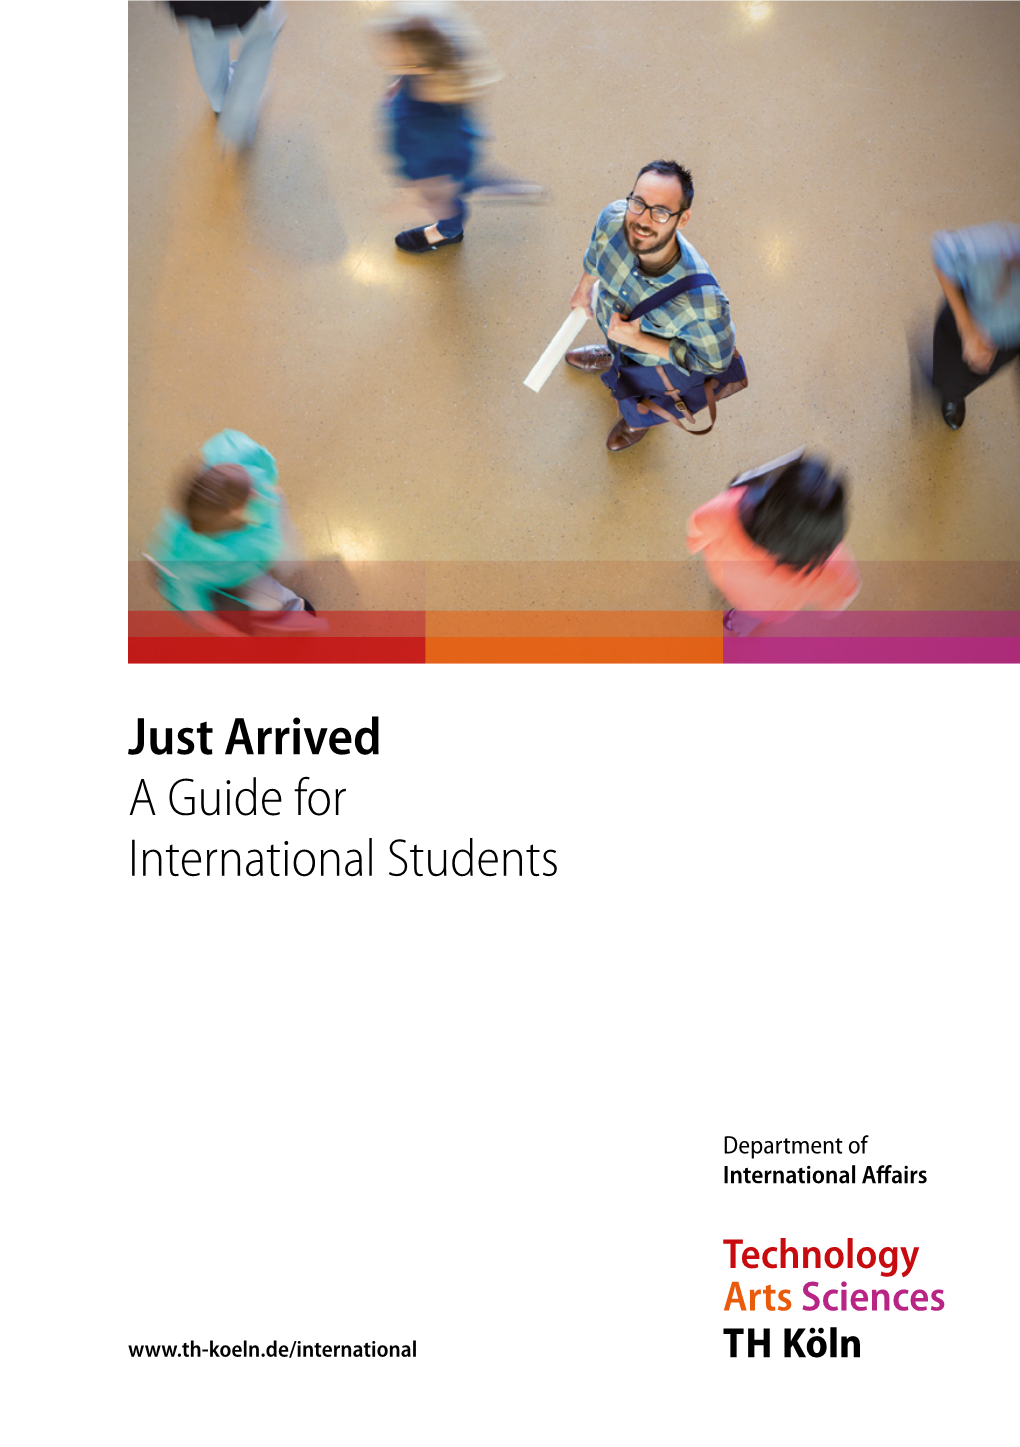 Just Arrived a Guide for International Students